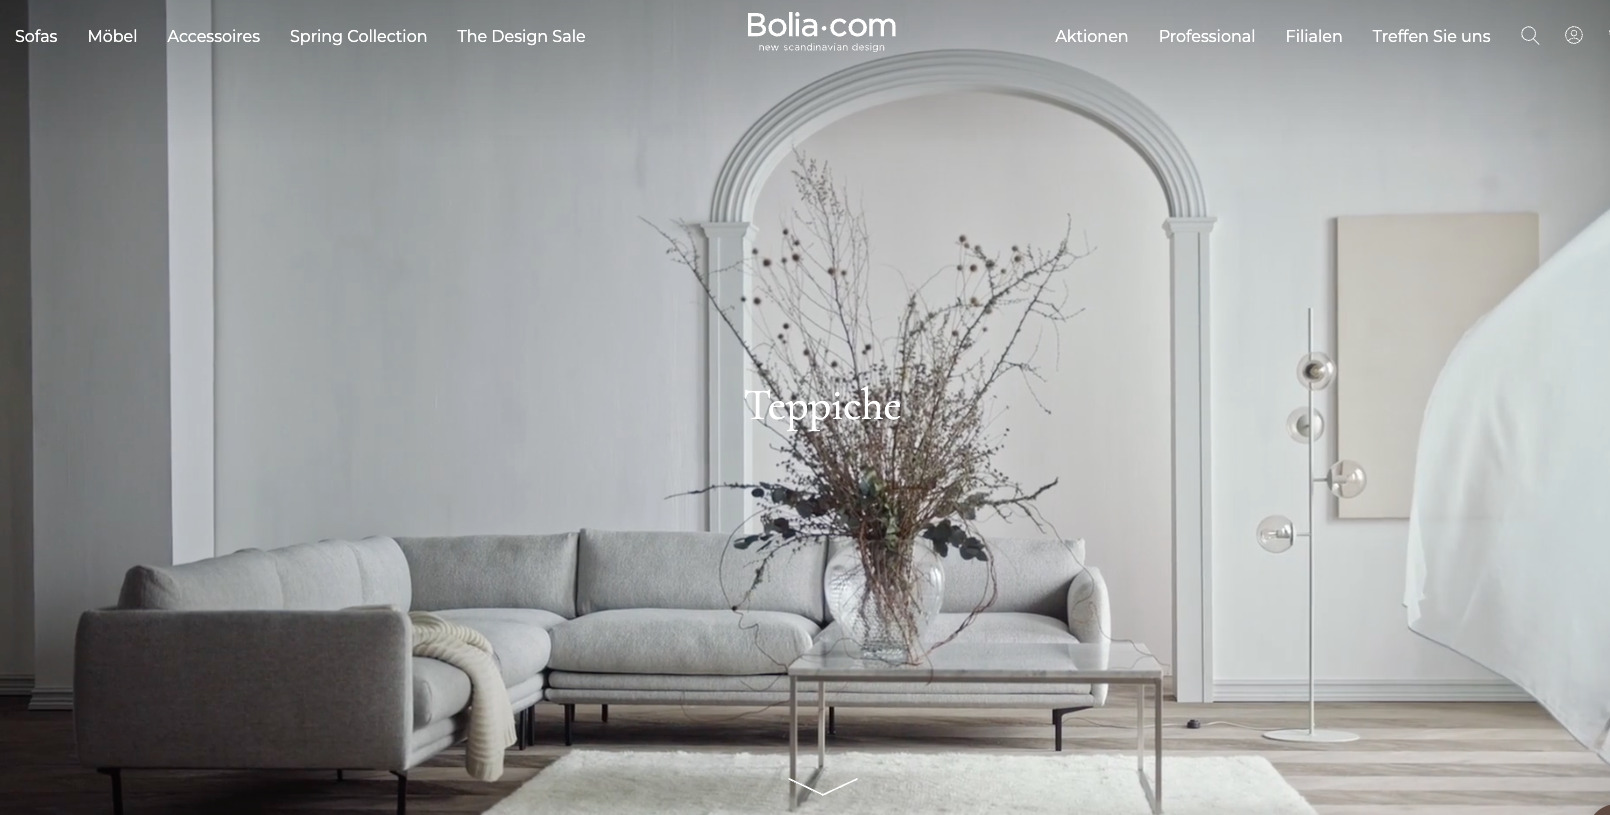 Bolia expands into the Asia-Pacific market